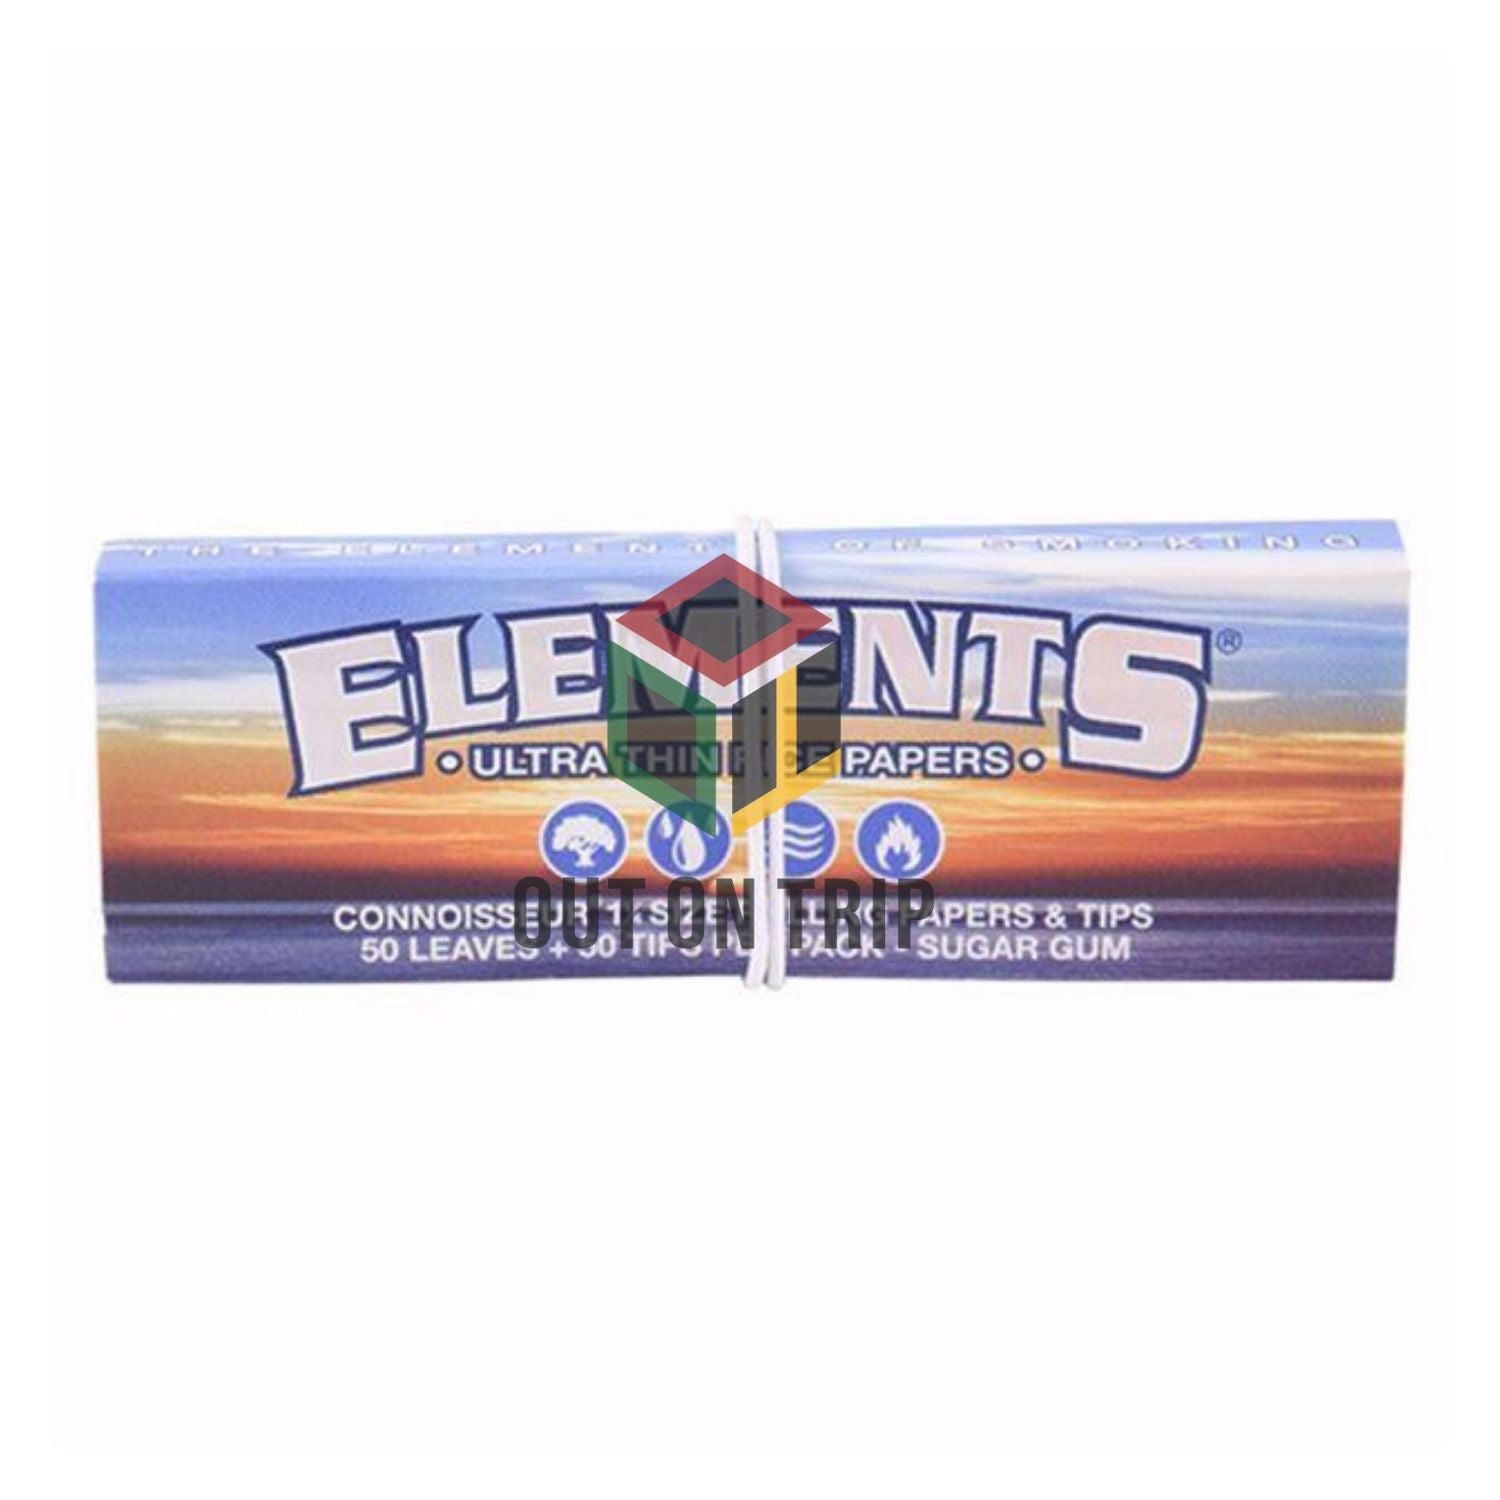 ELEMENTS Connoisseur - 1 1/4 Size Rolling Papers with Tips